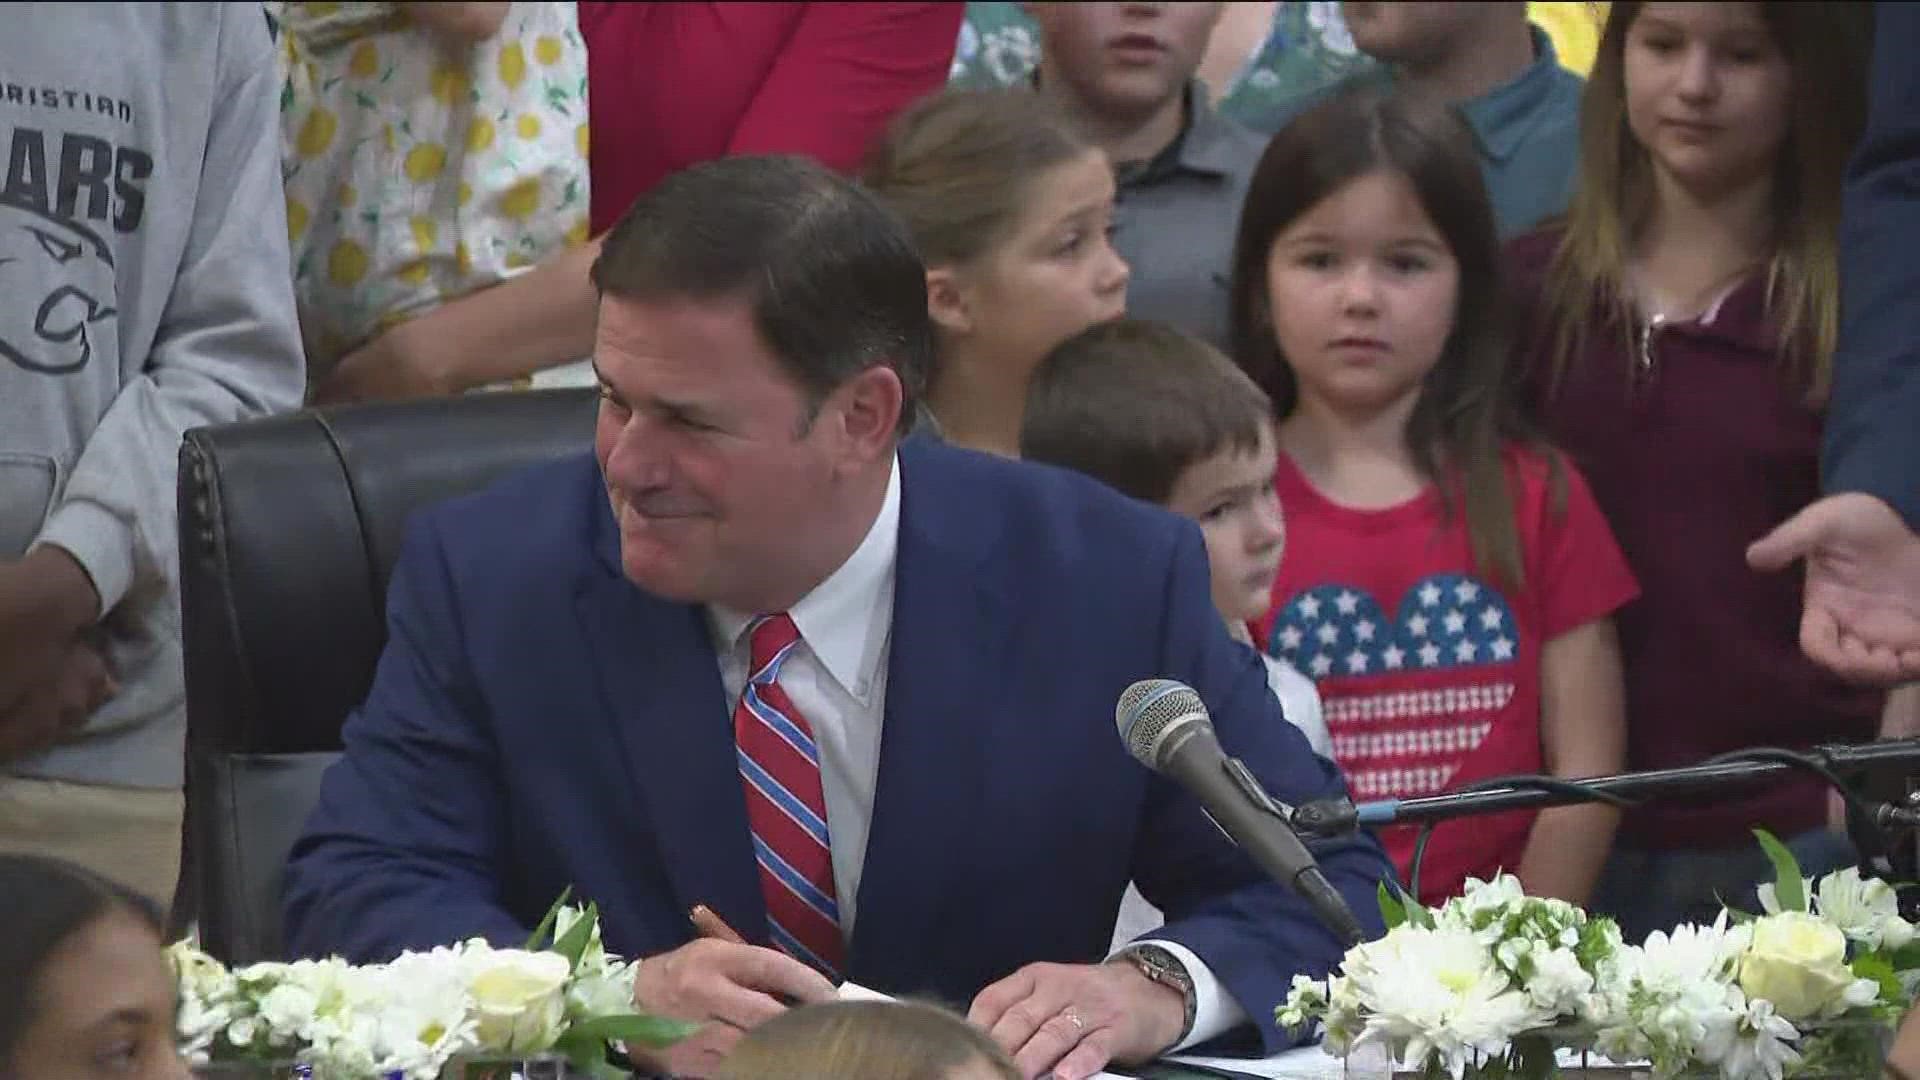 Ducey touted the signature bill he signed in July that gives all Arizona parents the ability to take state money that would go to their local public school and inste